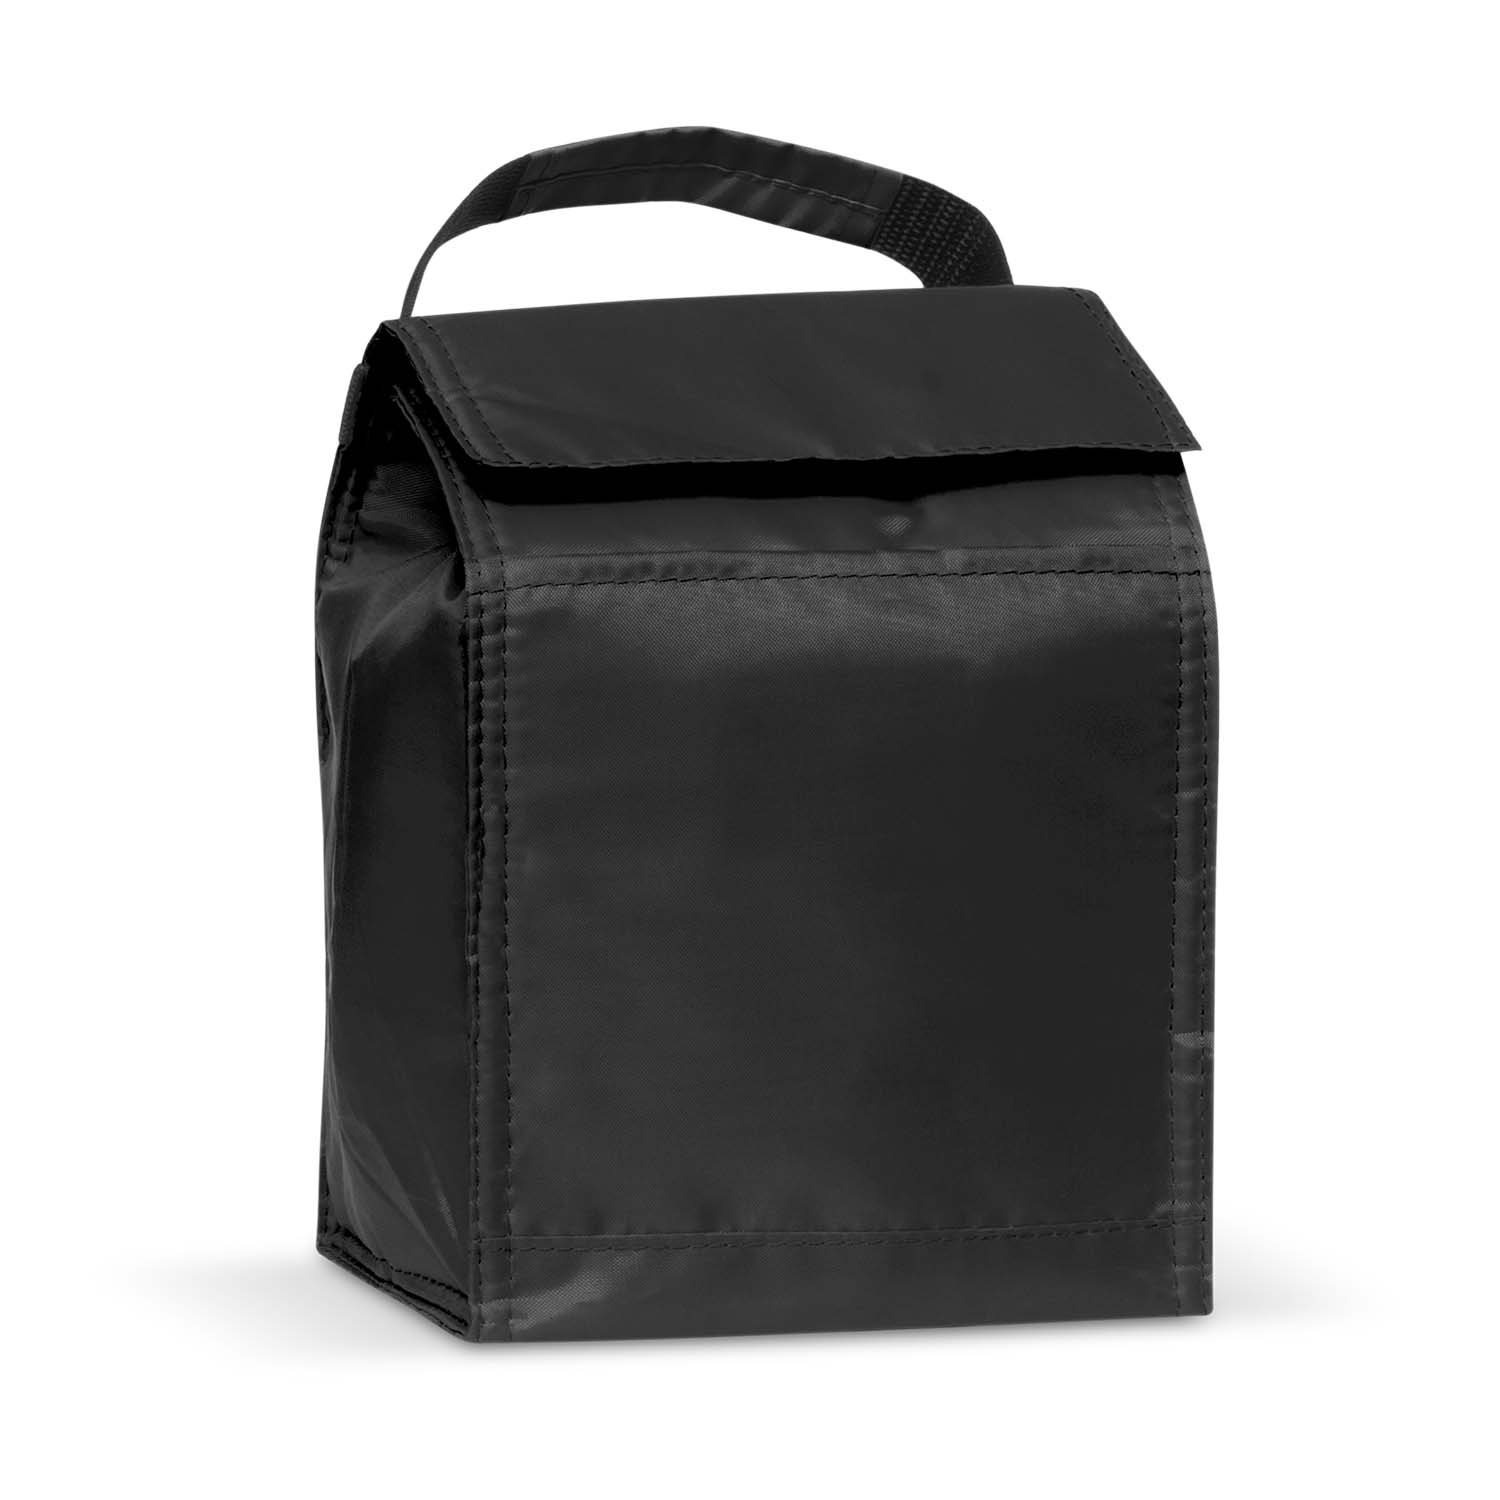 Printed Black Solo Lunch Cooler Bags Perth